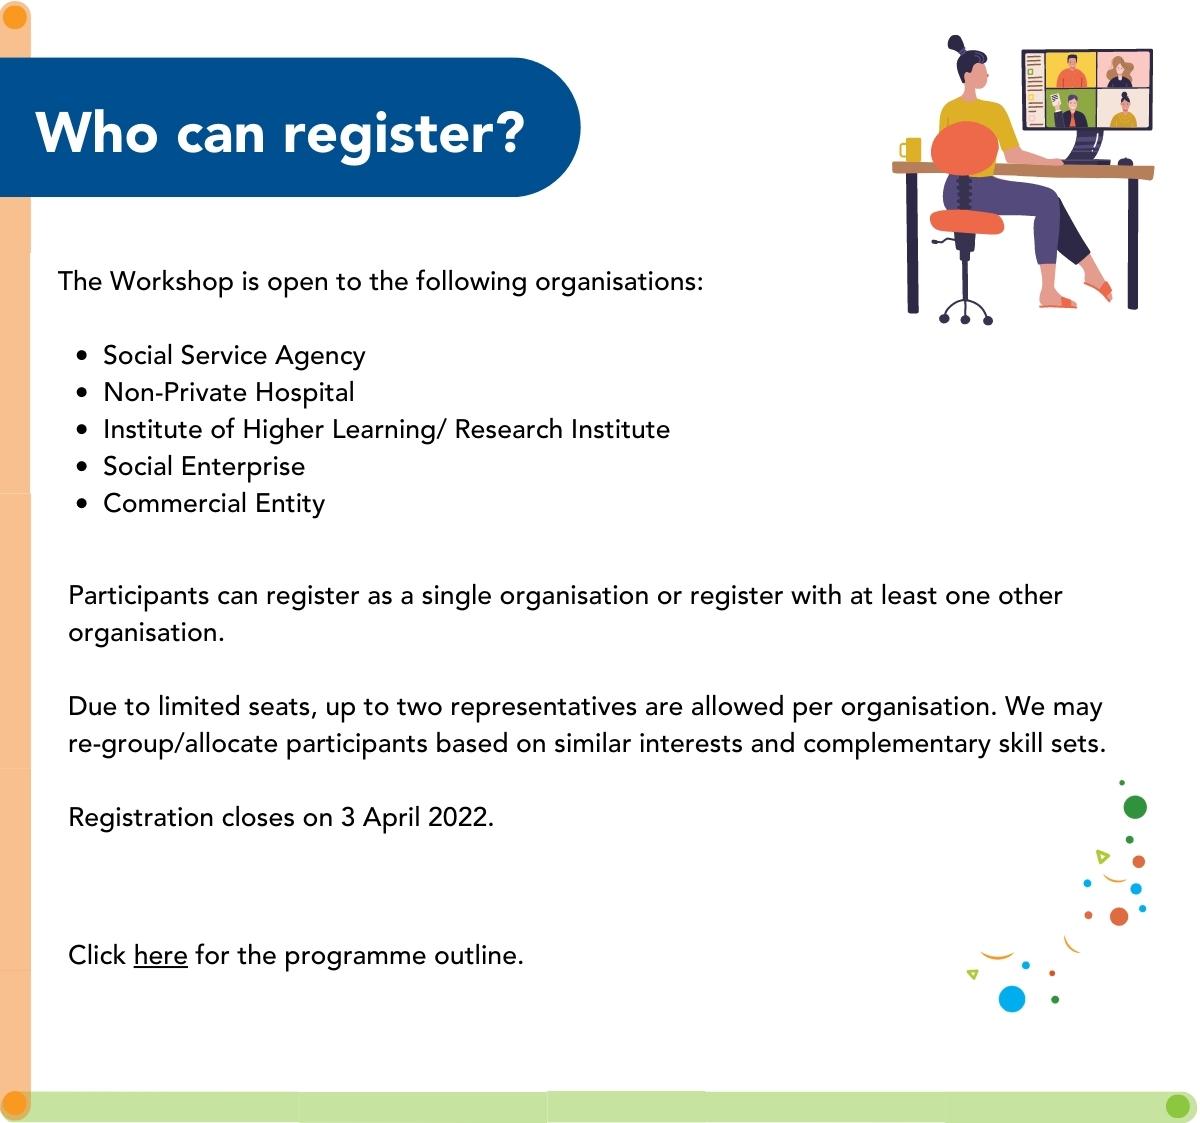 Who can register for the Workshop?
The Workshop is open to the following organisations:
	•	Social Service Agency
	•	Non-Private Hospital
	•	Institute of Higher Learning/ Research Institute
	•	Social Enterprise
	•	Commercial Entity
Participants can register as a single organisation or register with at least one other organisation. Due to limited seats, up to two representatives are allowed per organisation. We may re-group/allocate participants based on similar interests and complementary skill sets. 
Registration closes on 3 April 2022. 
Click here for the programme outline.